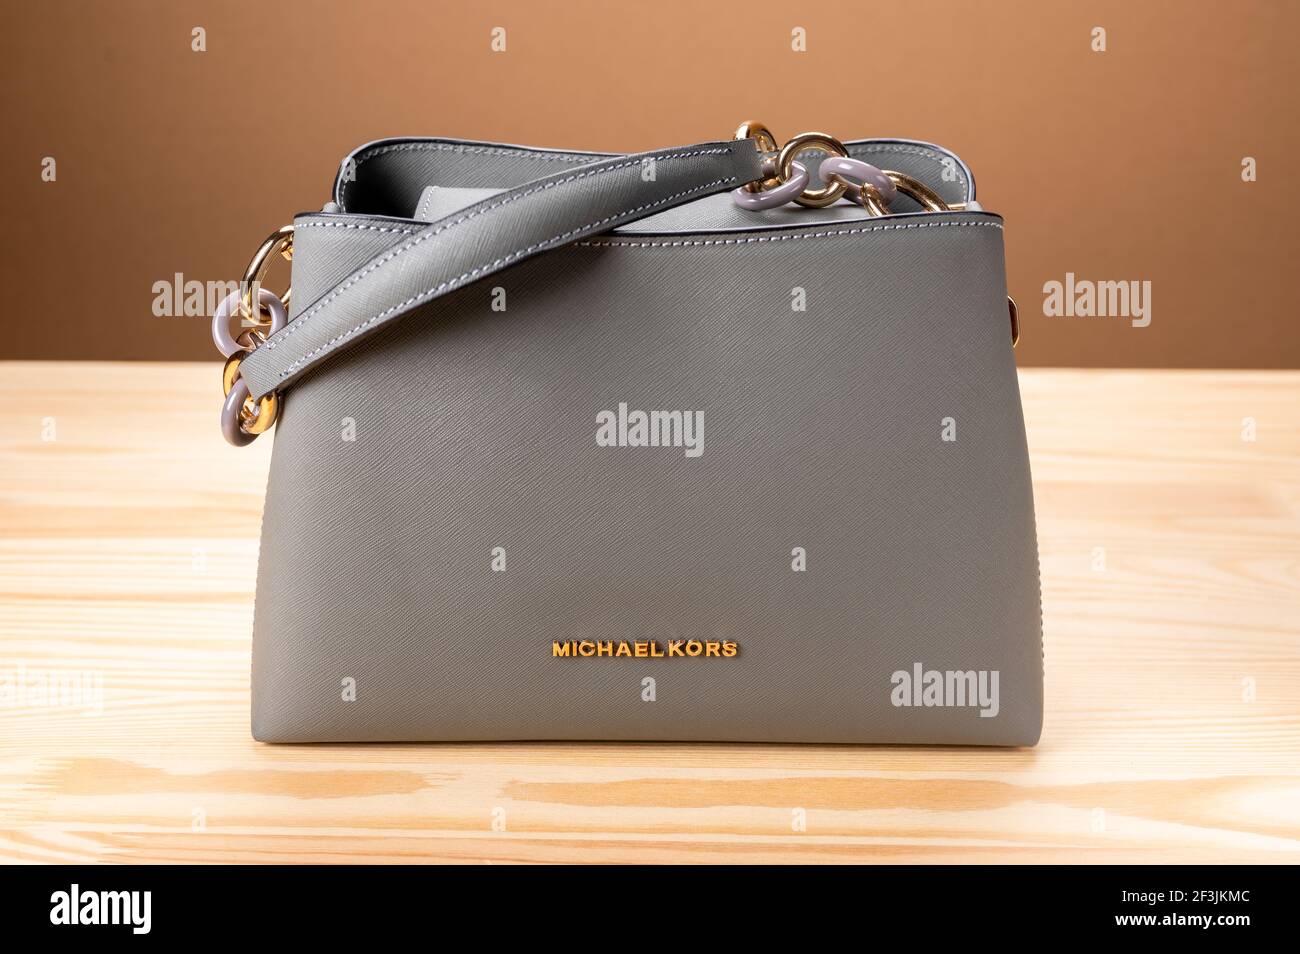 MOSCOW, RUSSIA - MARCH, 17, 2021: new model leather grey handbag Michael  Kors on wooden table. Michael Kors brand of clothing, accessories and  perfume Stock Photo - Alamy